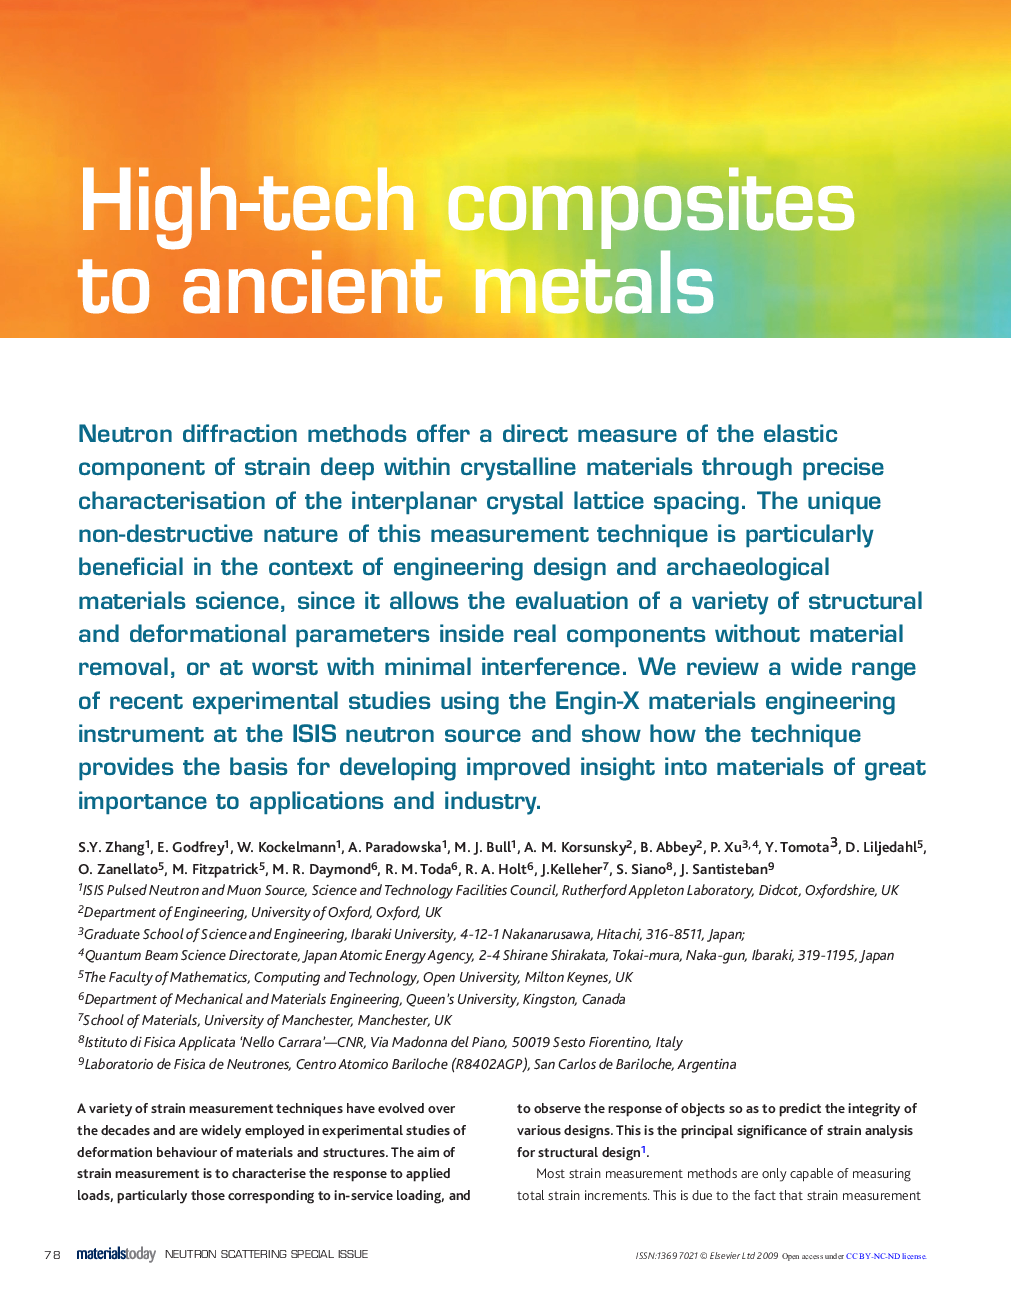 High-tech composites to ancient metals